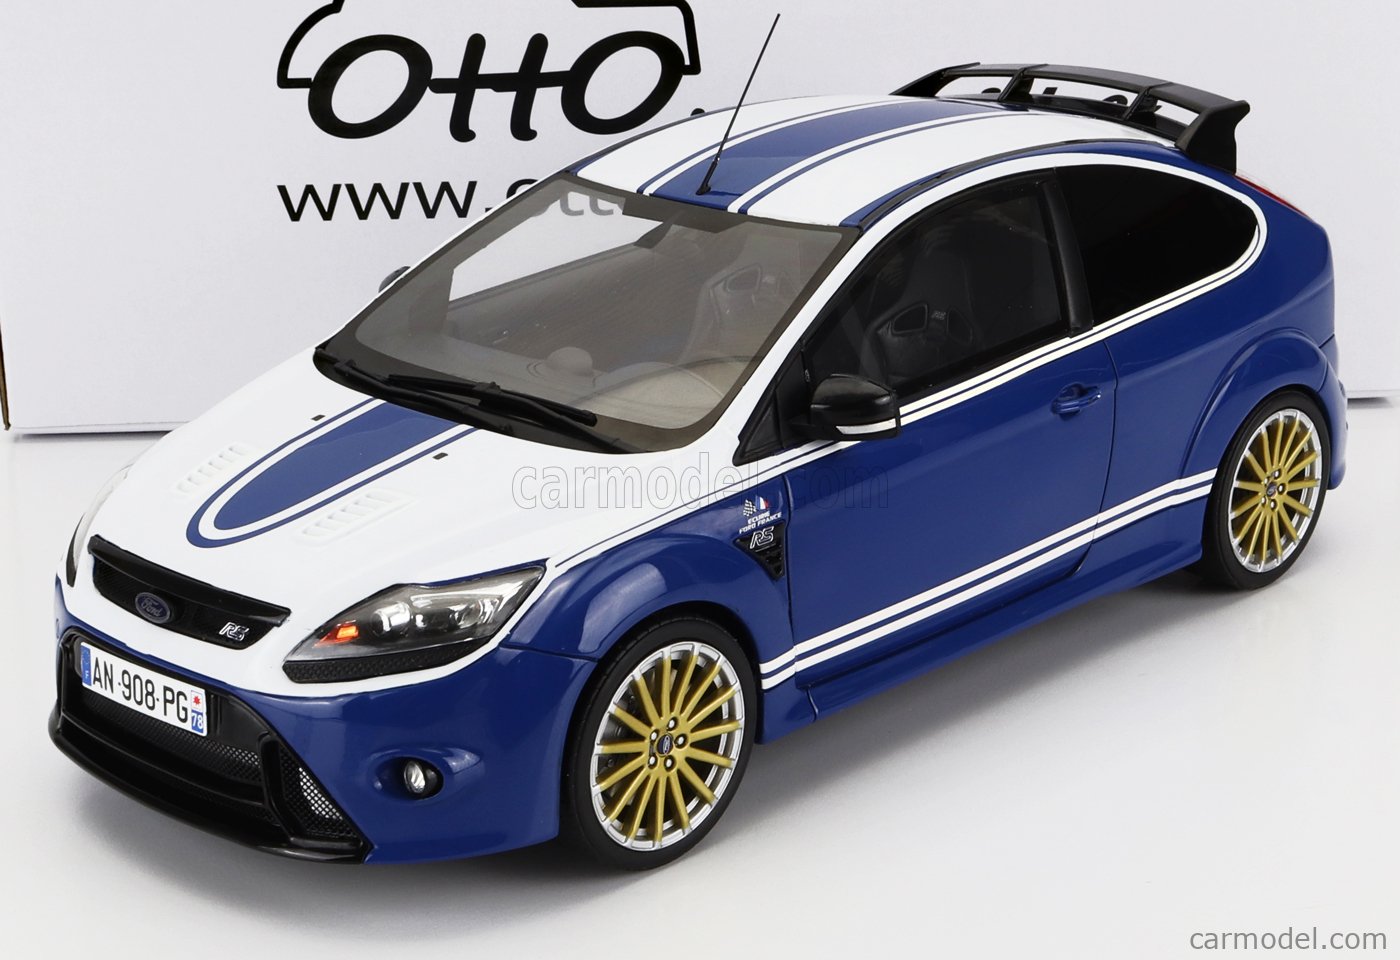 OTTO-MOBILE OT1010 Scale 1/18  FORD ENGLAND FOCUS RS MKII 2010 - 24h LE  MANS TRIBUTE BLUE WHITE